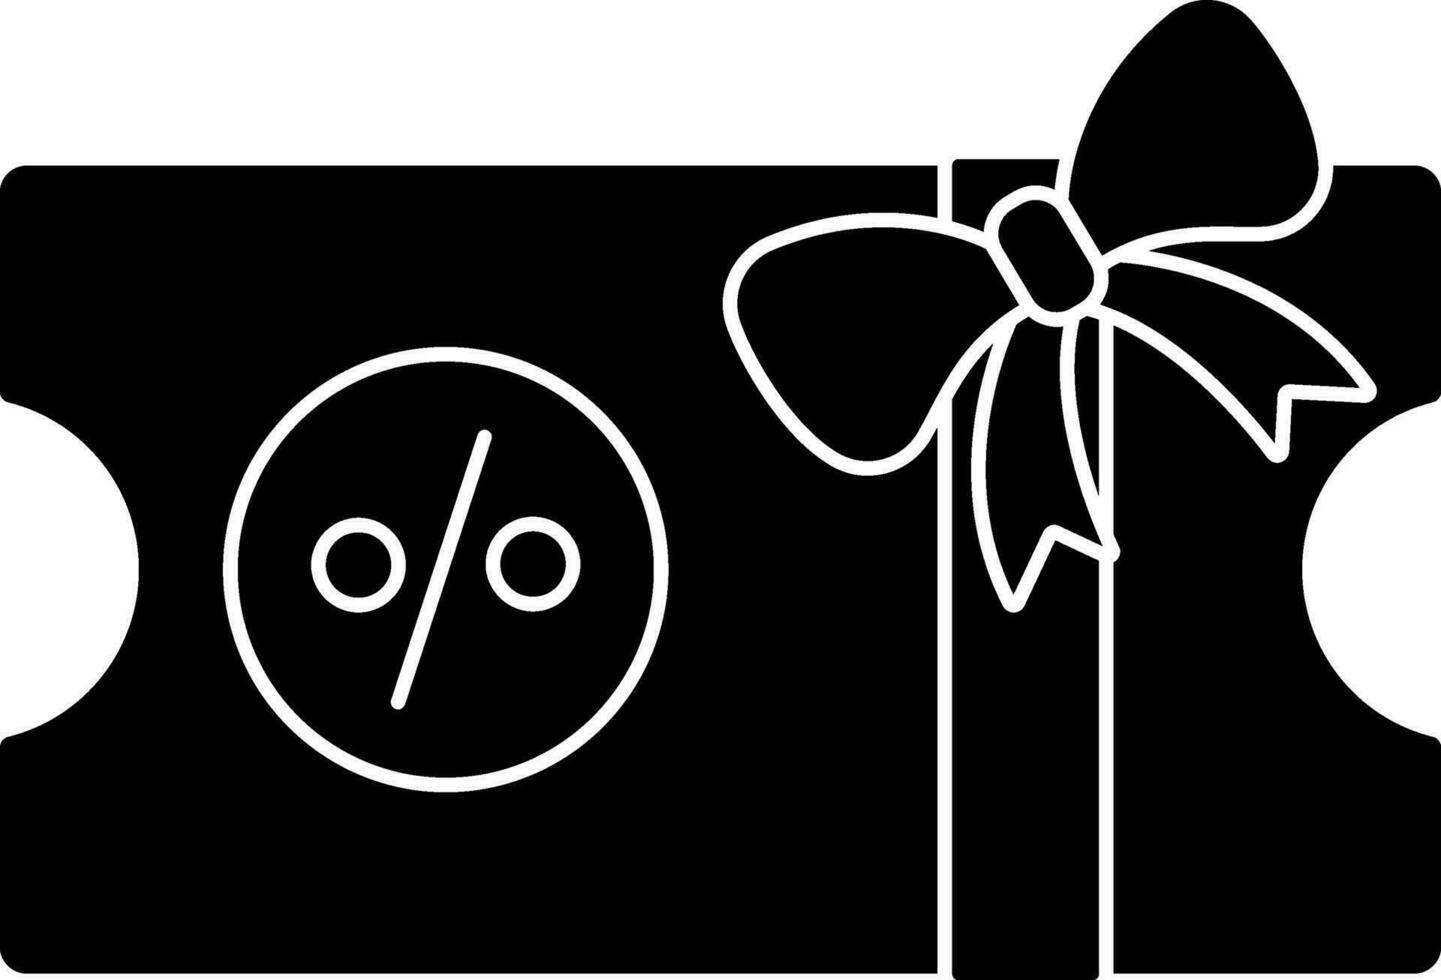 Gifting Discount Voucher Icon In black and white Color. vector